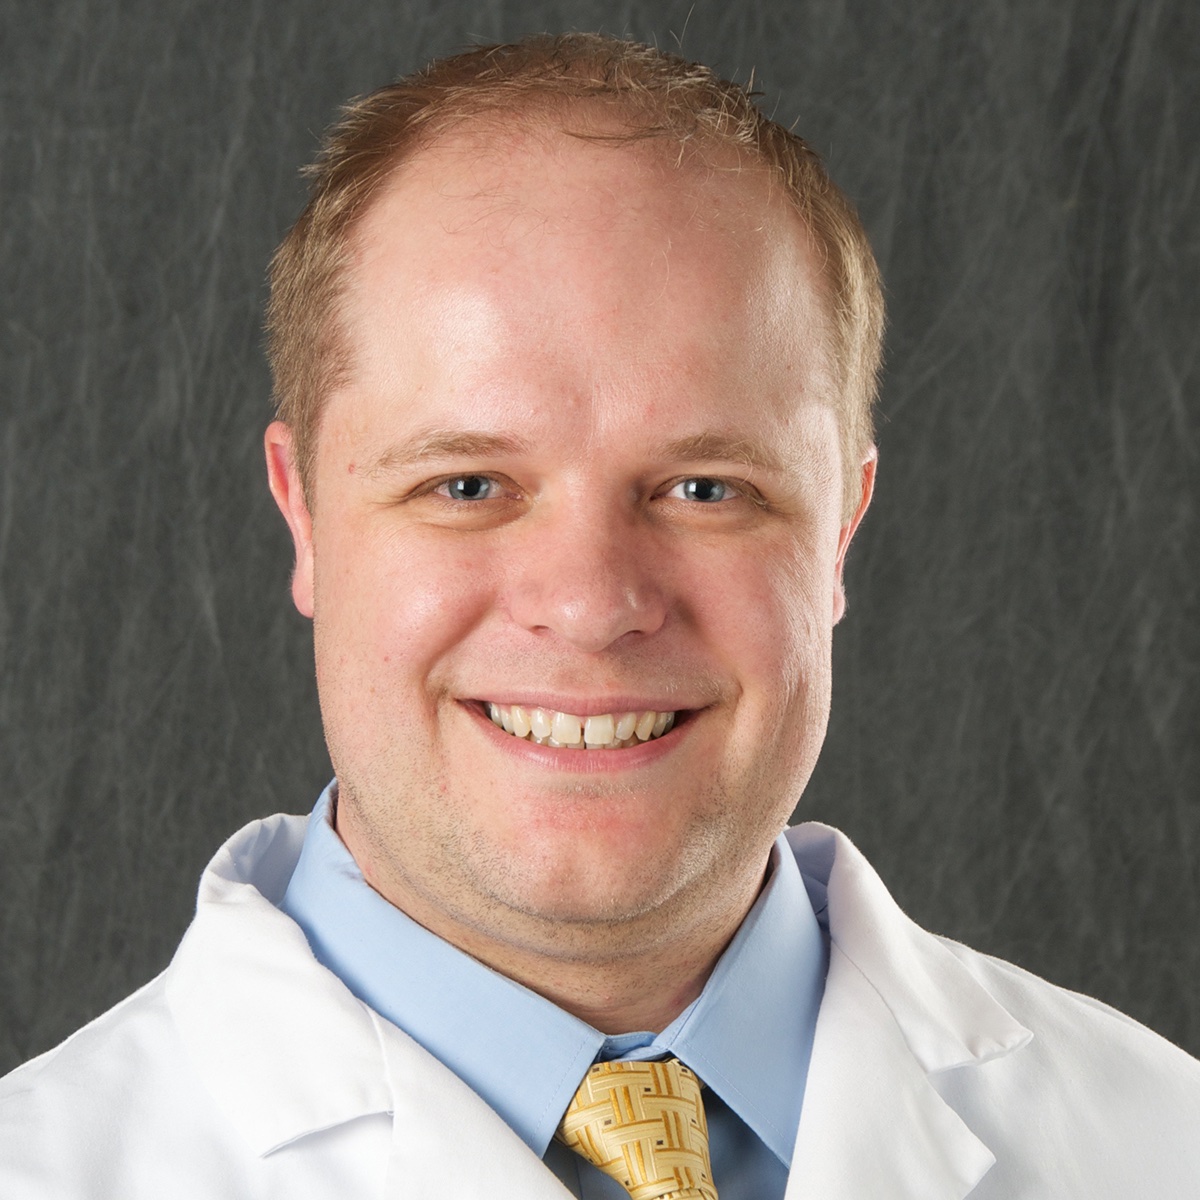 Bryan Allen MBA, MD, PhD named chair & DEO of @IowaRadOnc in @IowaMed, effective July 1, 2023. He is associate chair of translational research, co-leader of the Experimental Therapeutics Program @UIowaCancer. Top clinical & translational scientist, clinician, educator & mentor